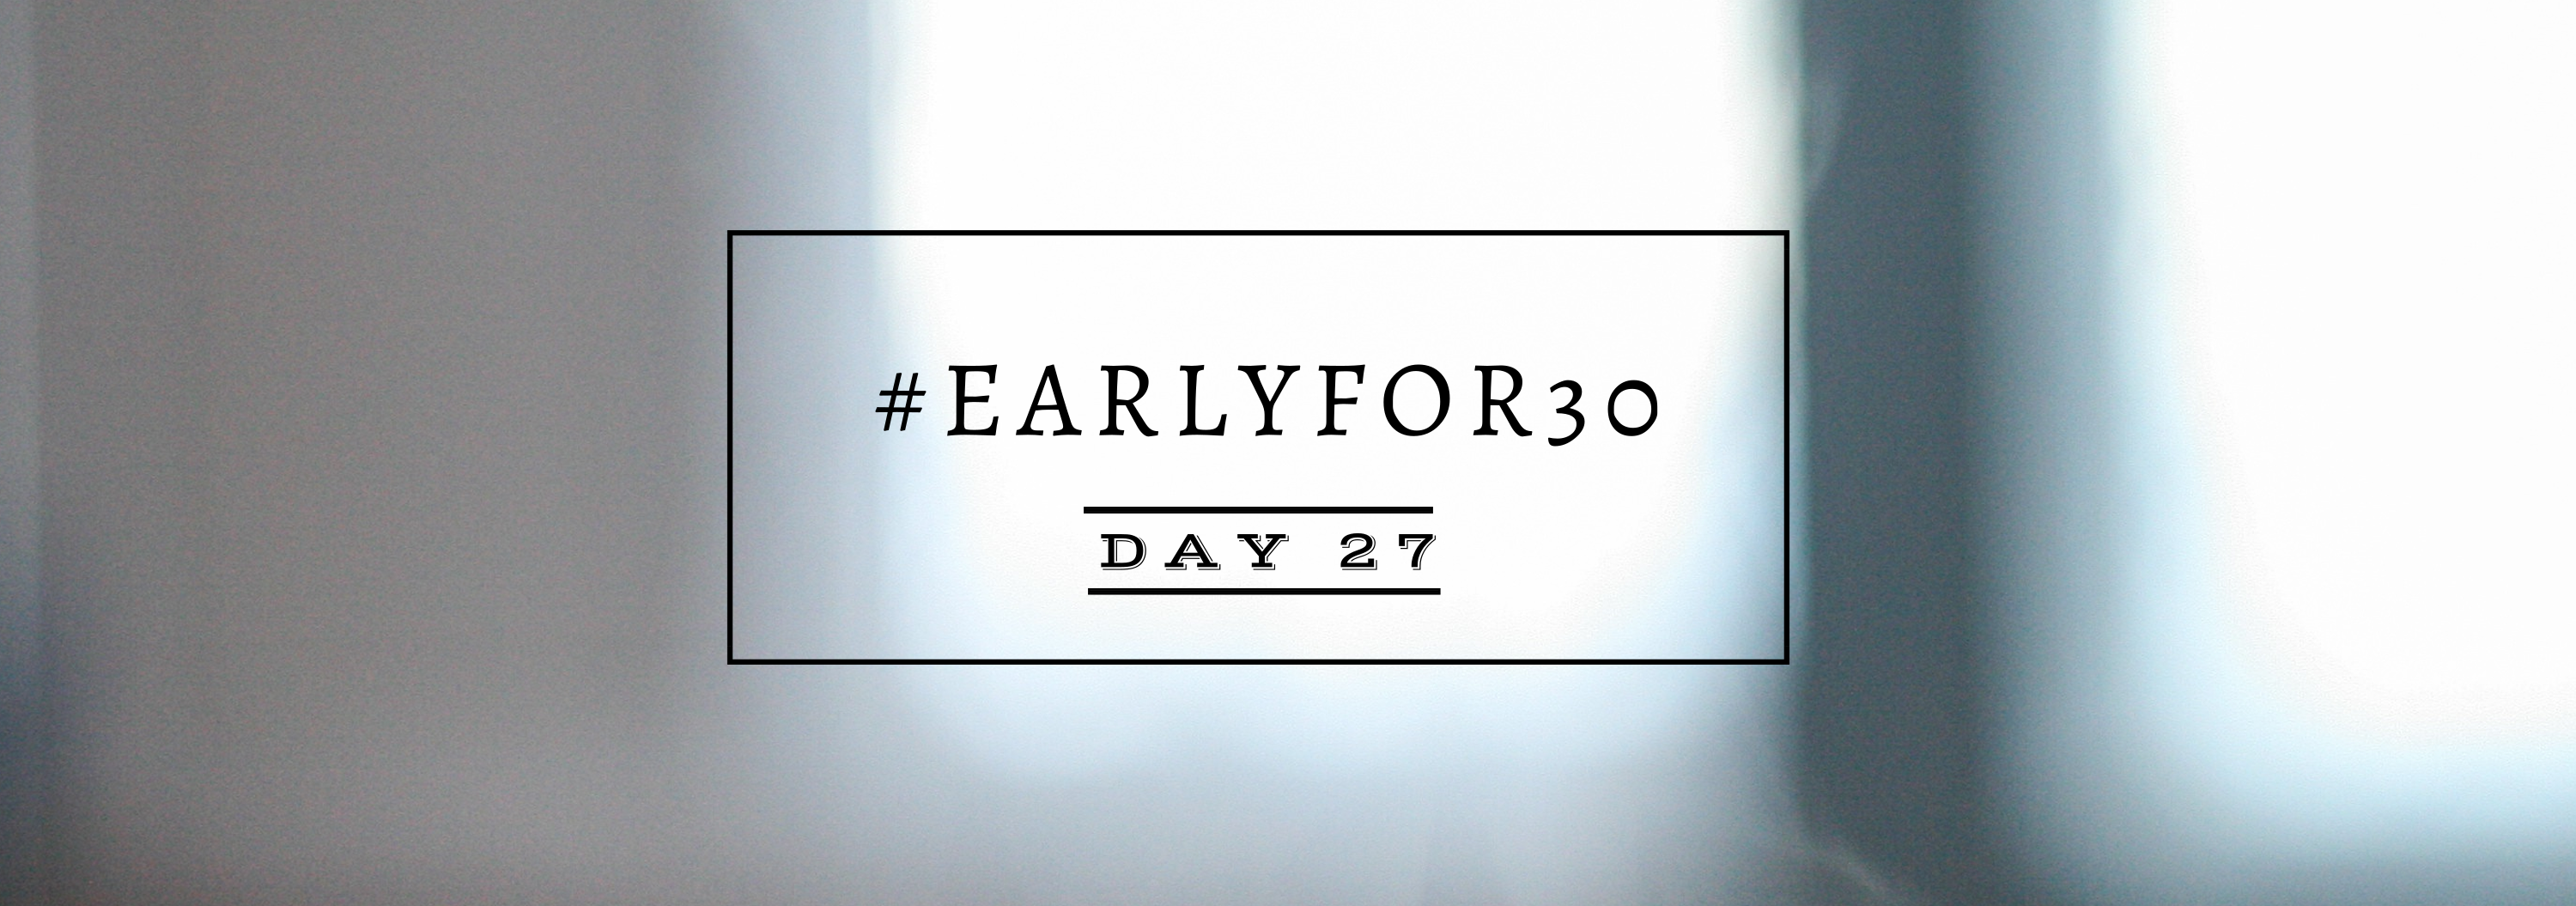 #Earlyfor30 – Day 27